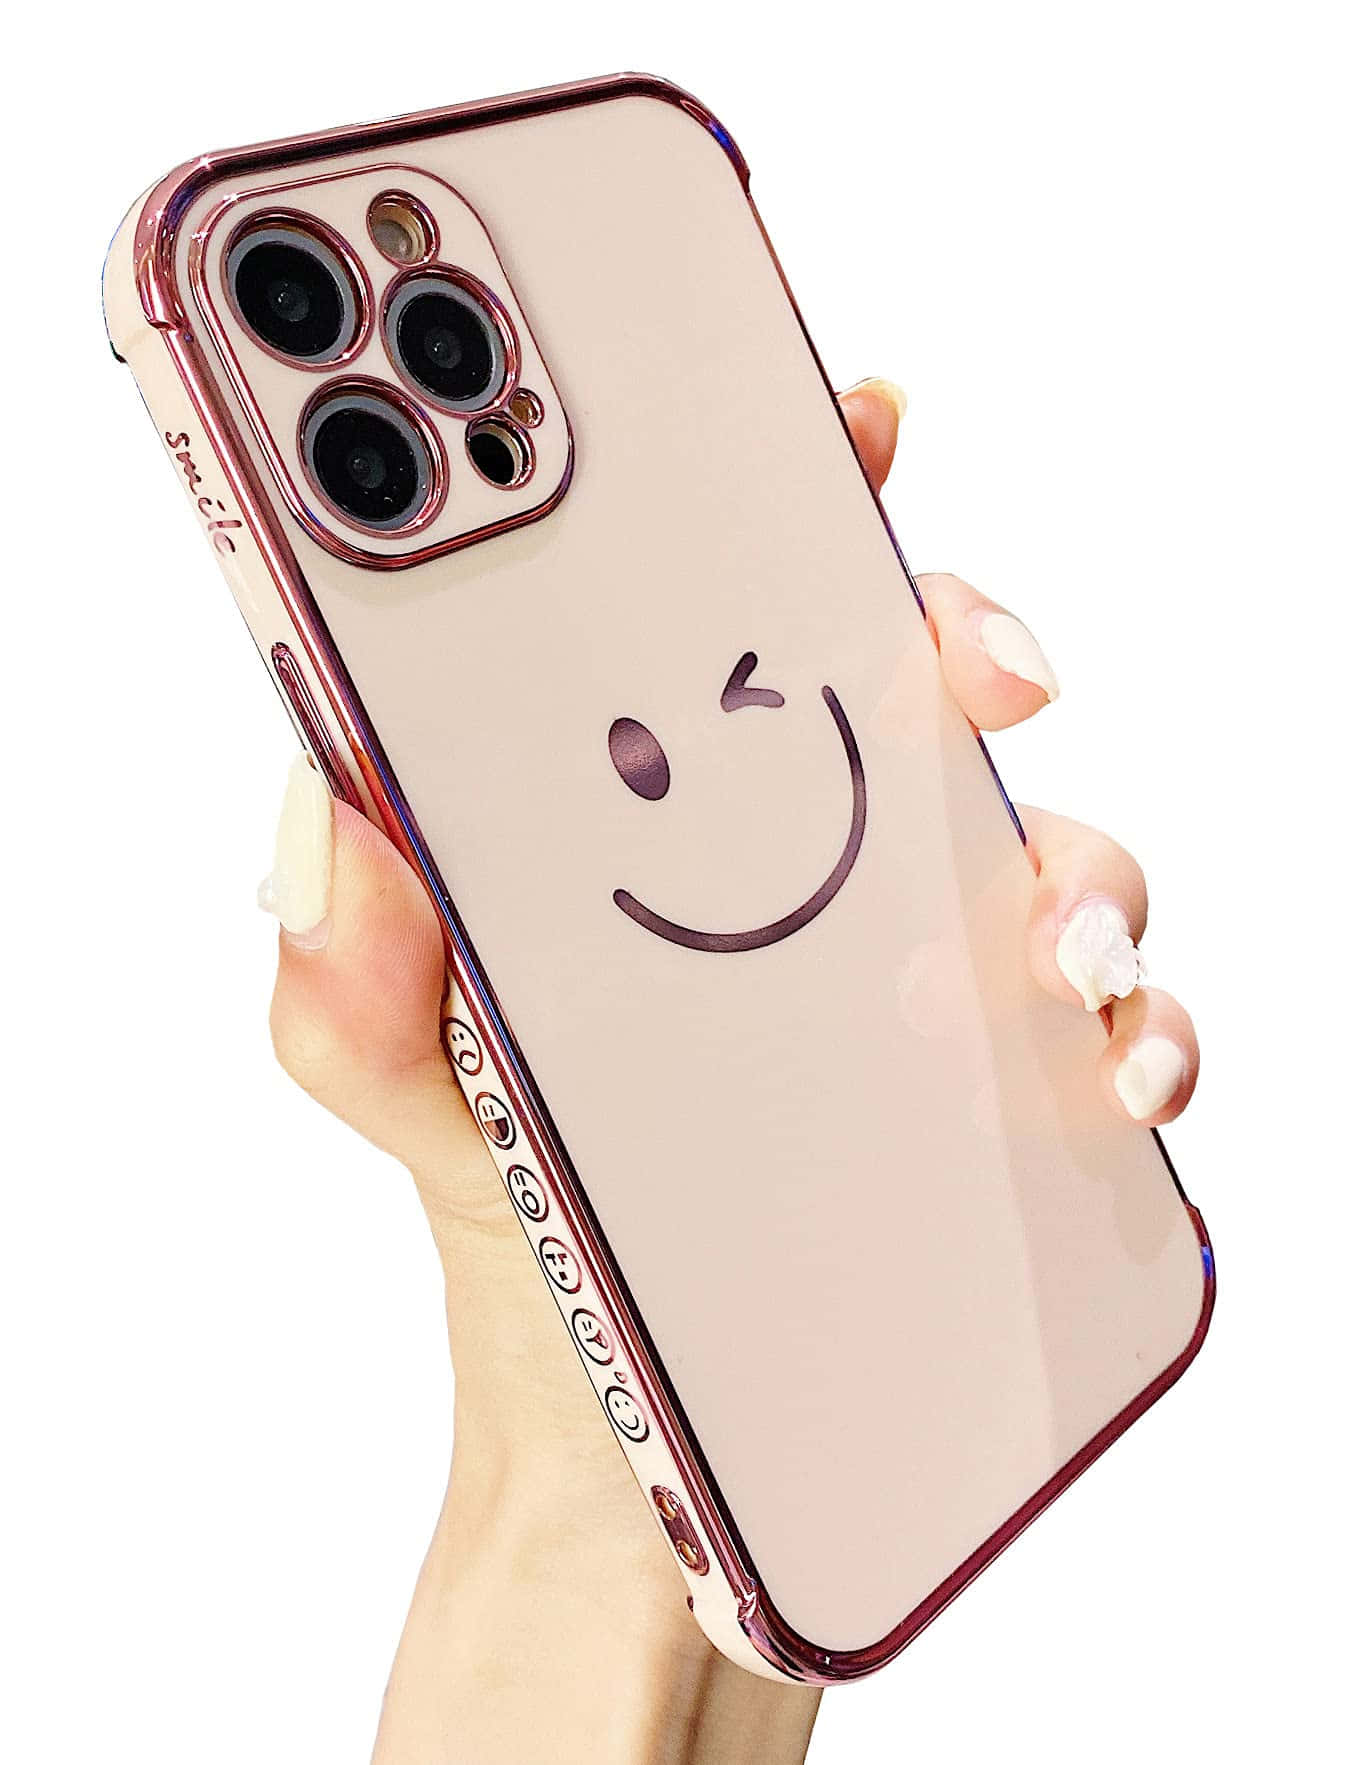 Let Yourself Shine with a Cute Iphone